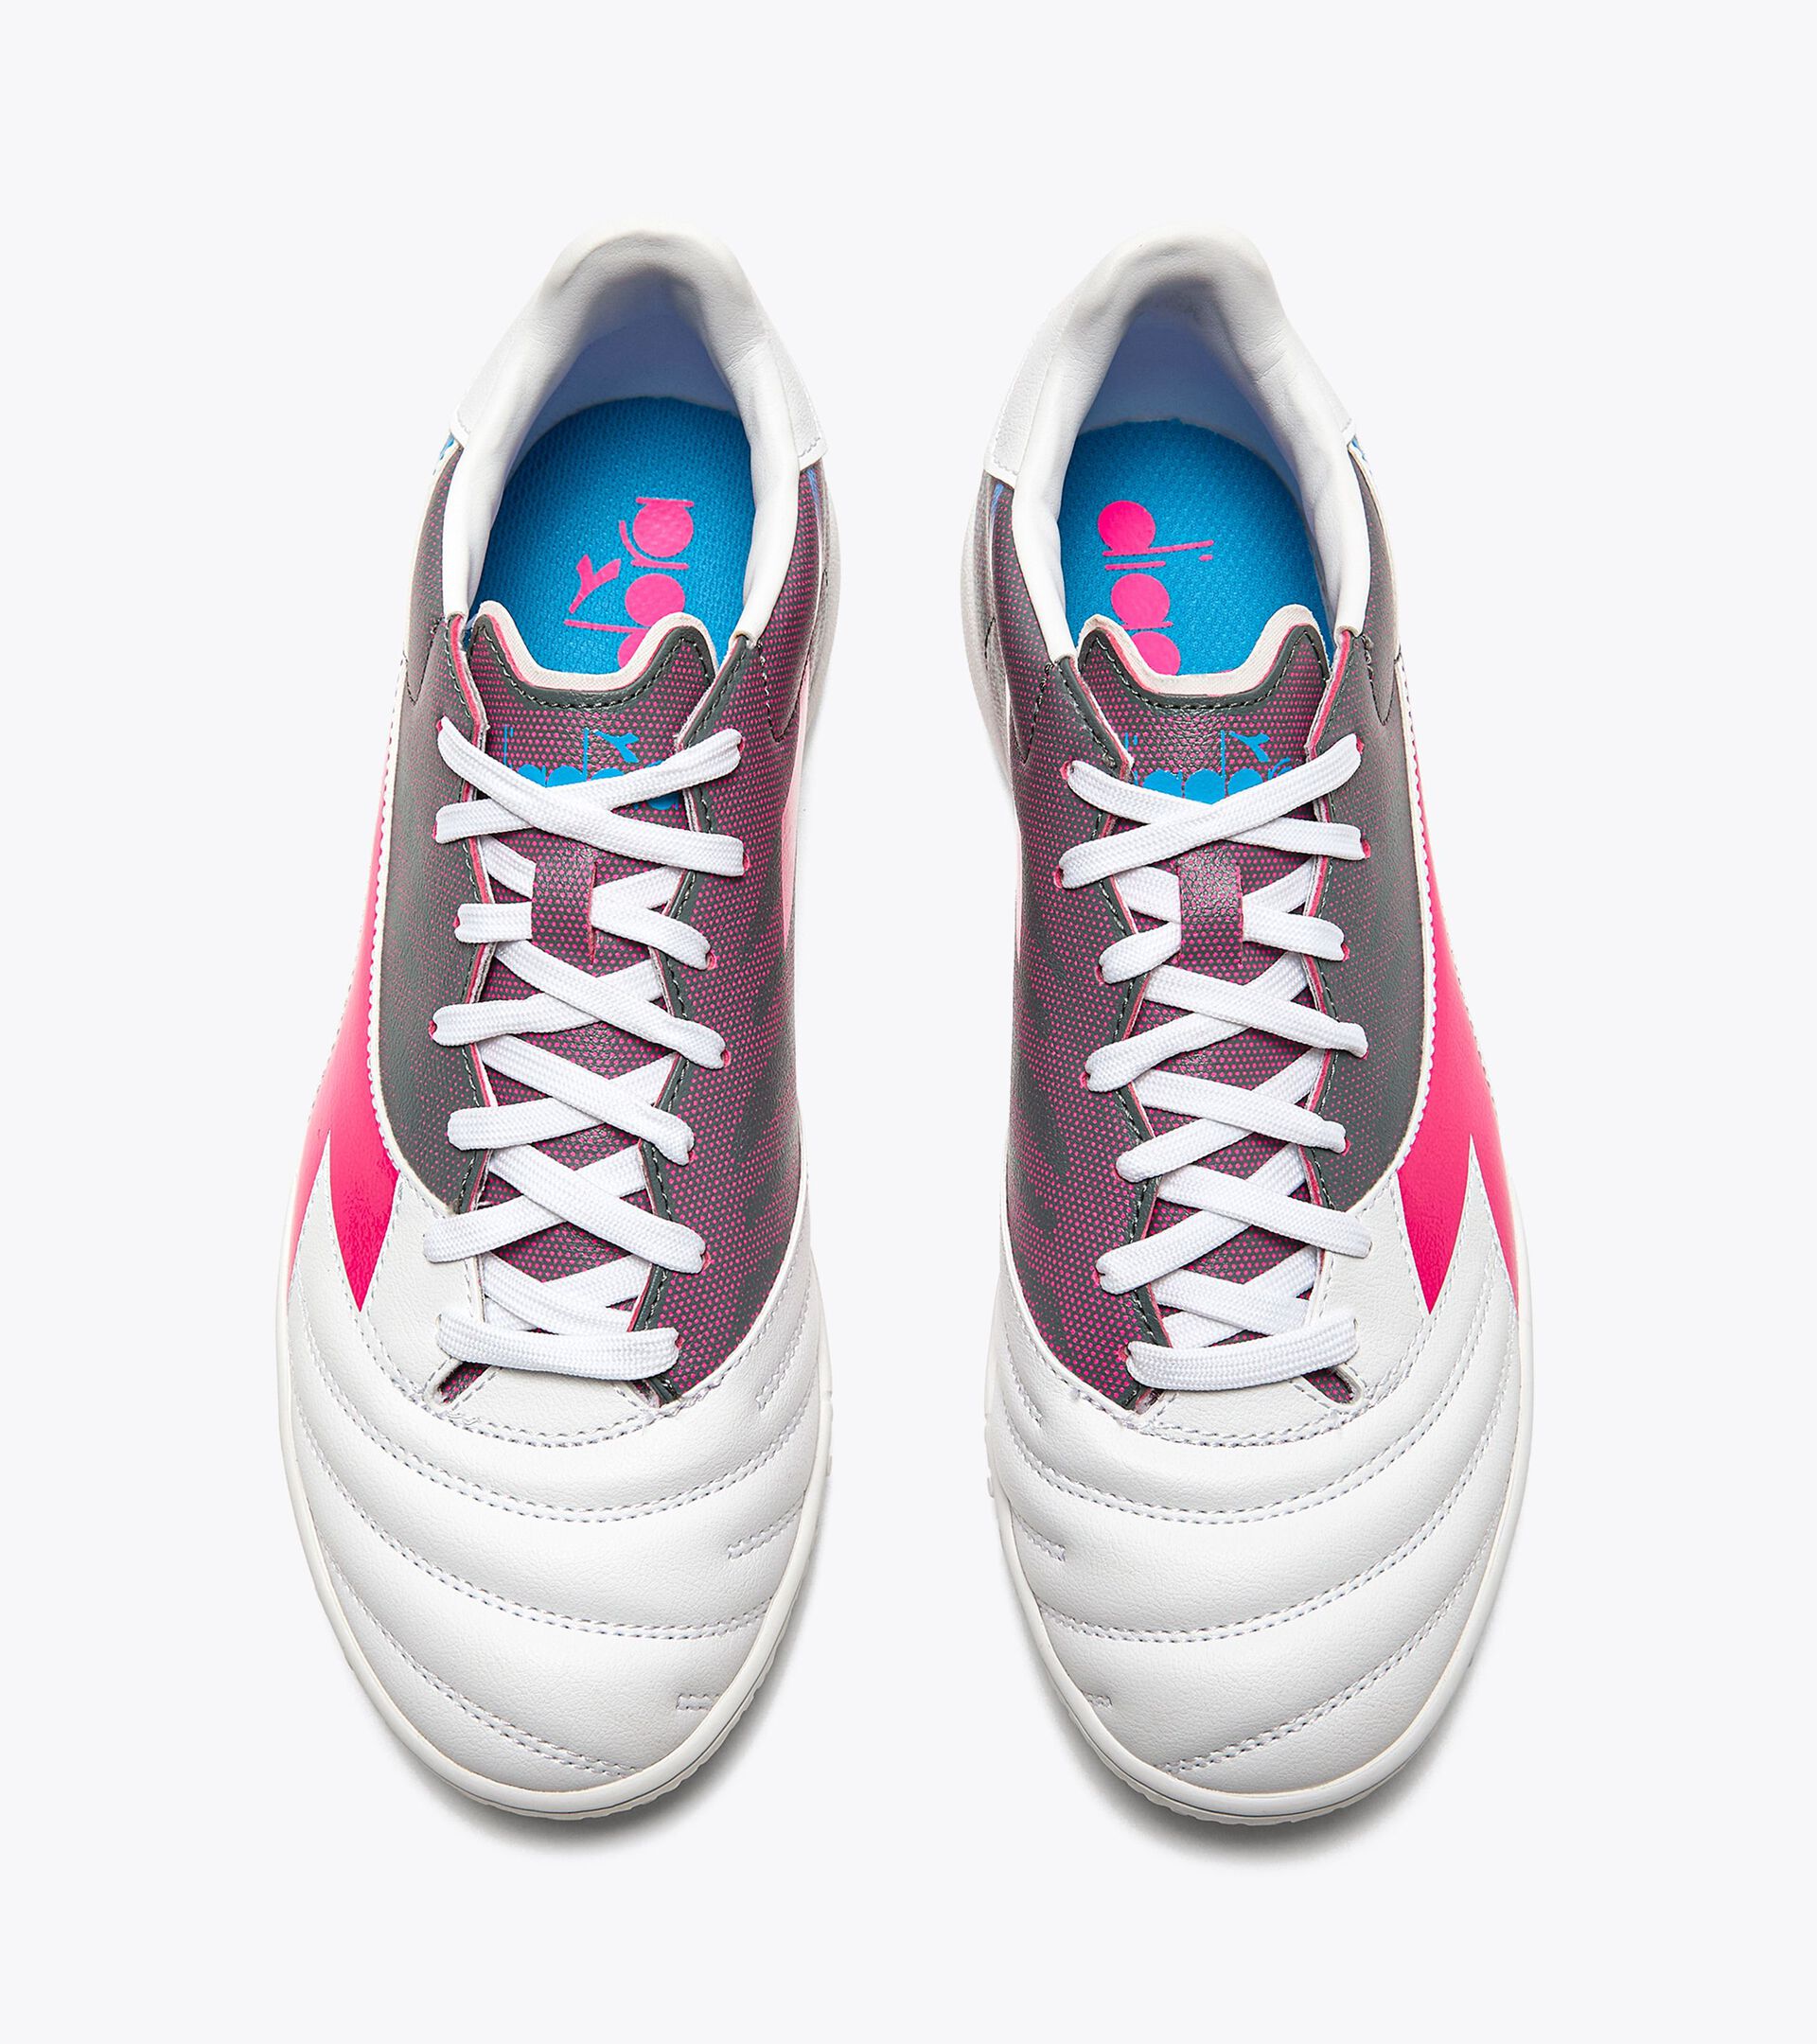 Calcio boots for synthetic turfs or firm grounds - Men BRASIL ELITE VELOCE GR TFR WHT/PINK FLUO/BLUE FLUO - Diadora